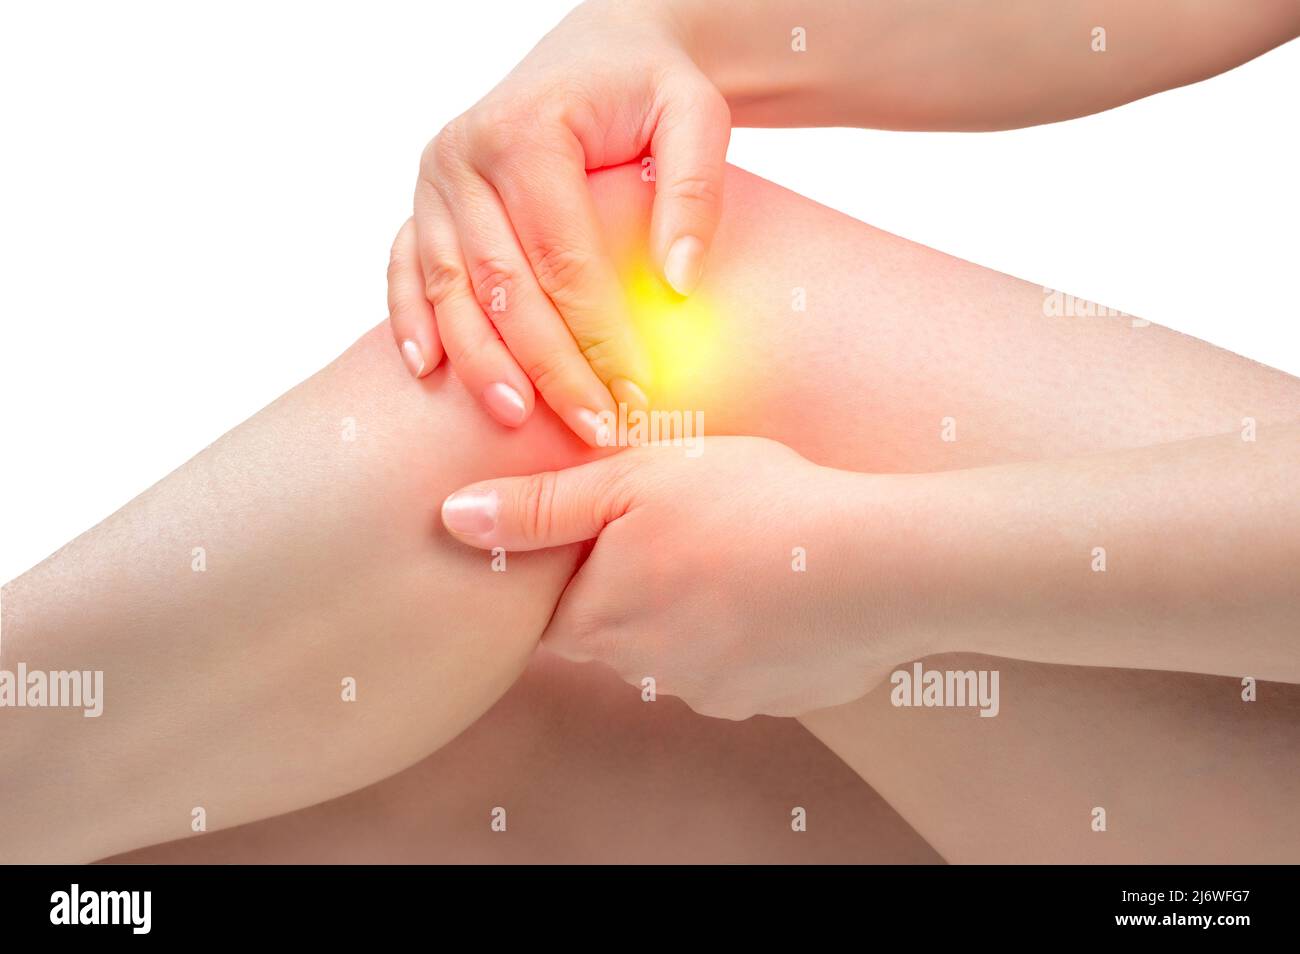 woman suffering from pain in knee. Tendon problems and Joint inflammation on white background. woman touching knee with red highlights. Knees pain, ha Stock Photo